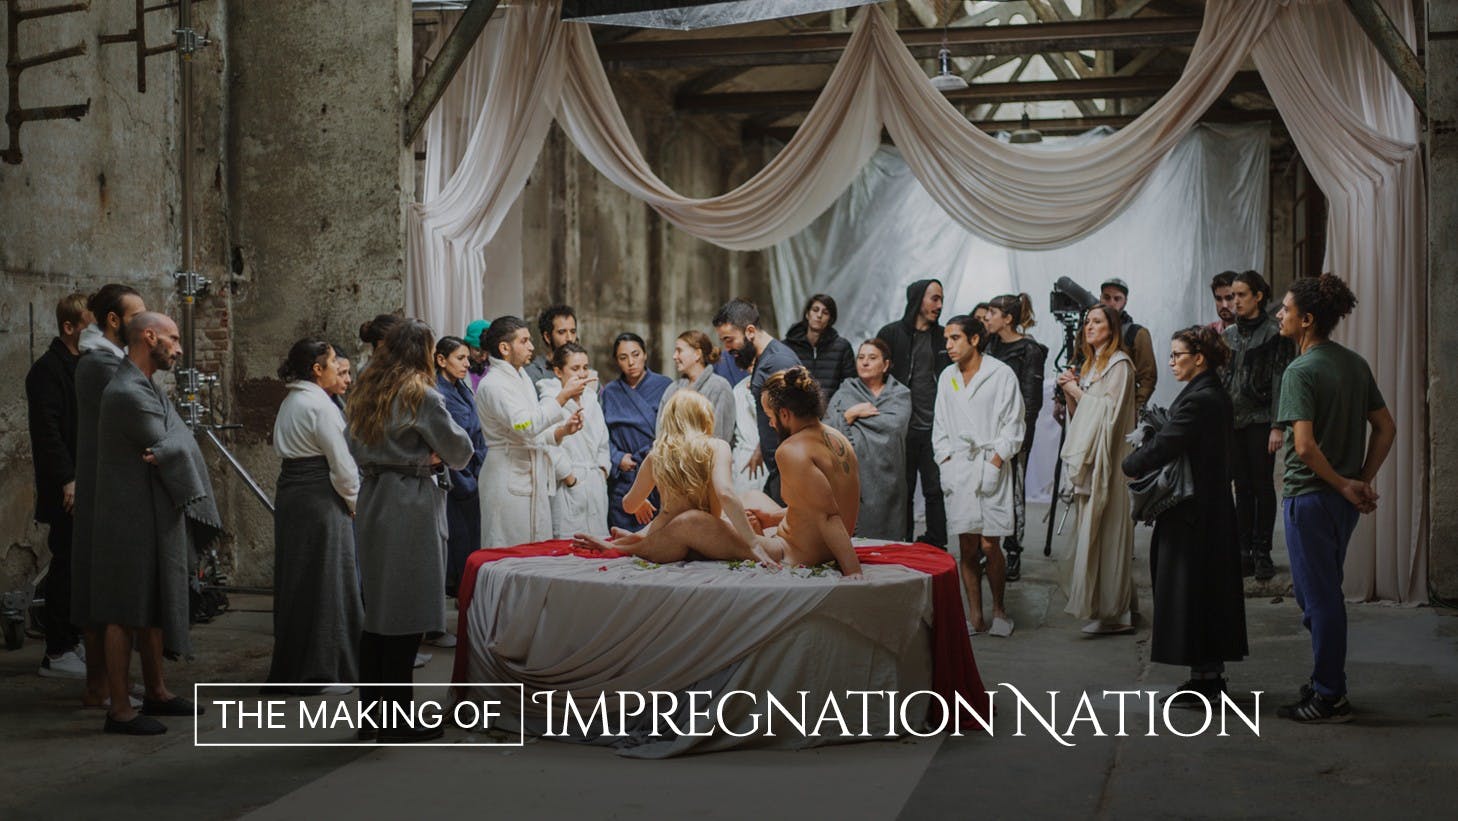 Behind The Scenes Impregnation Nation